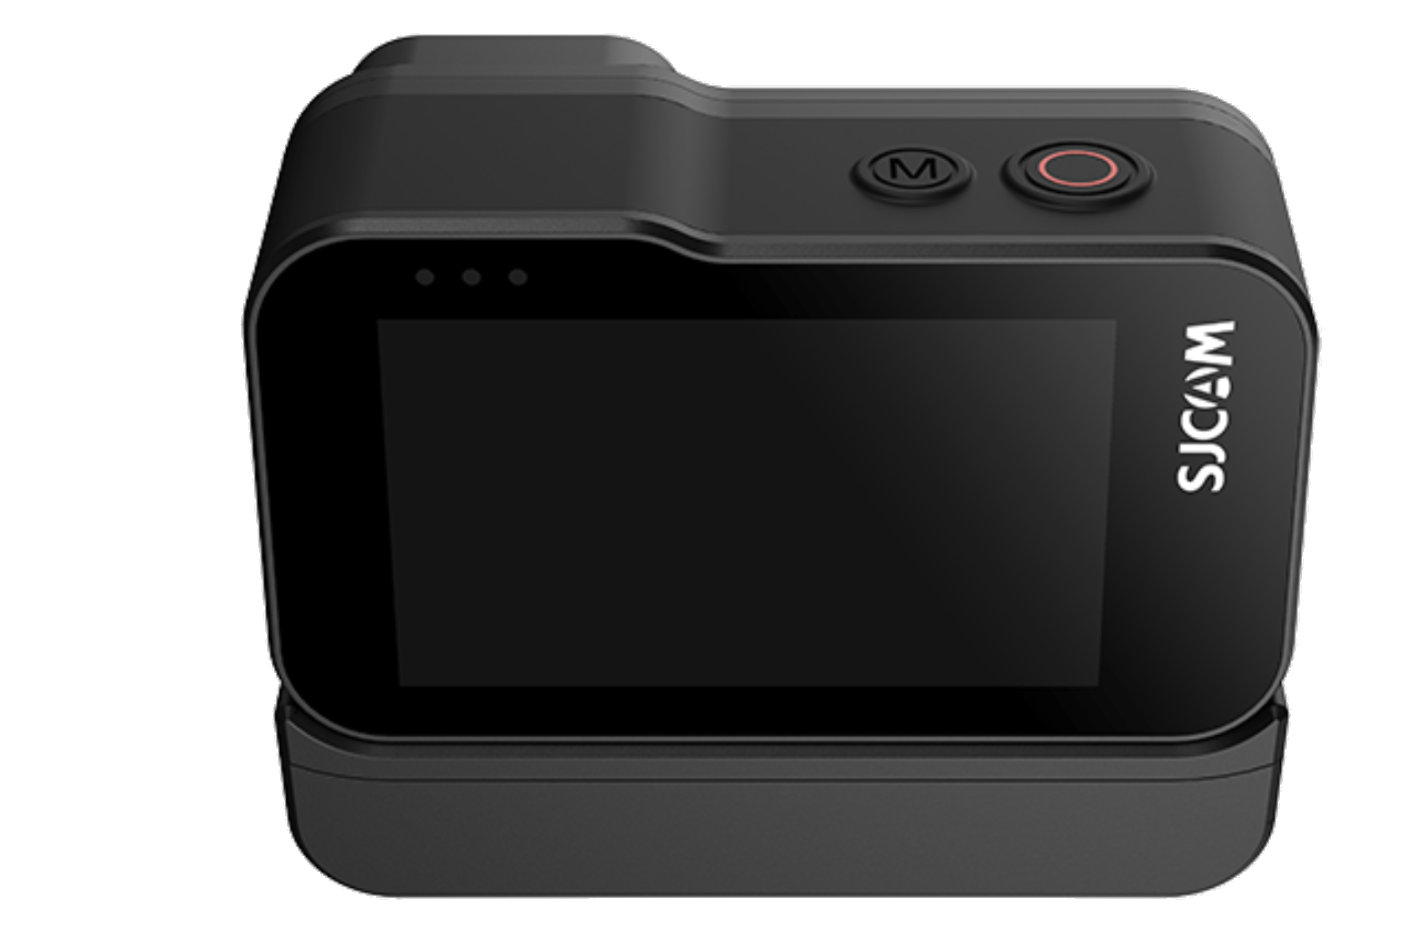 SJCAM announces world’s first action camera with dual lenses